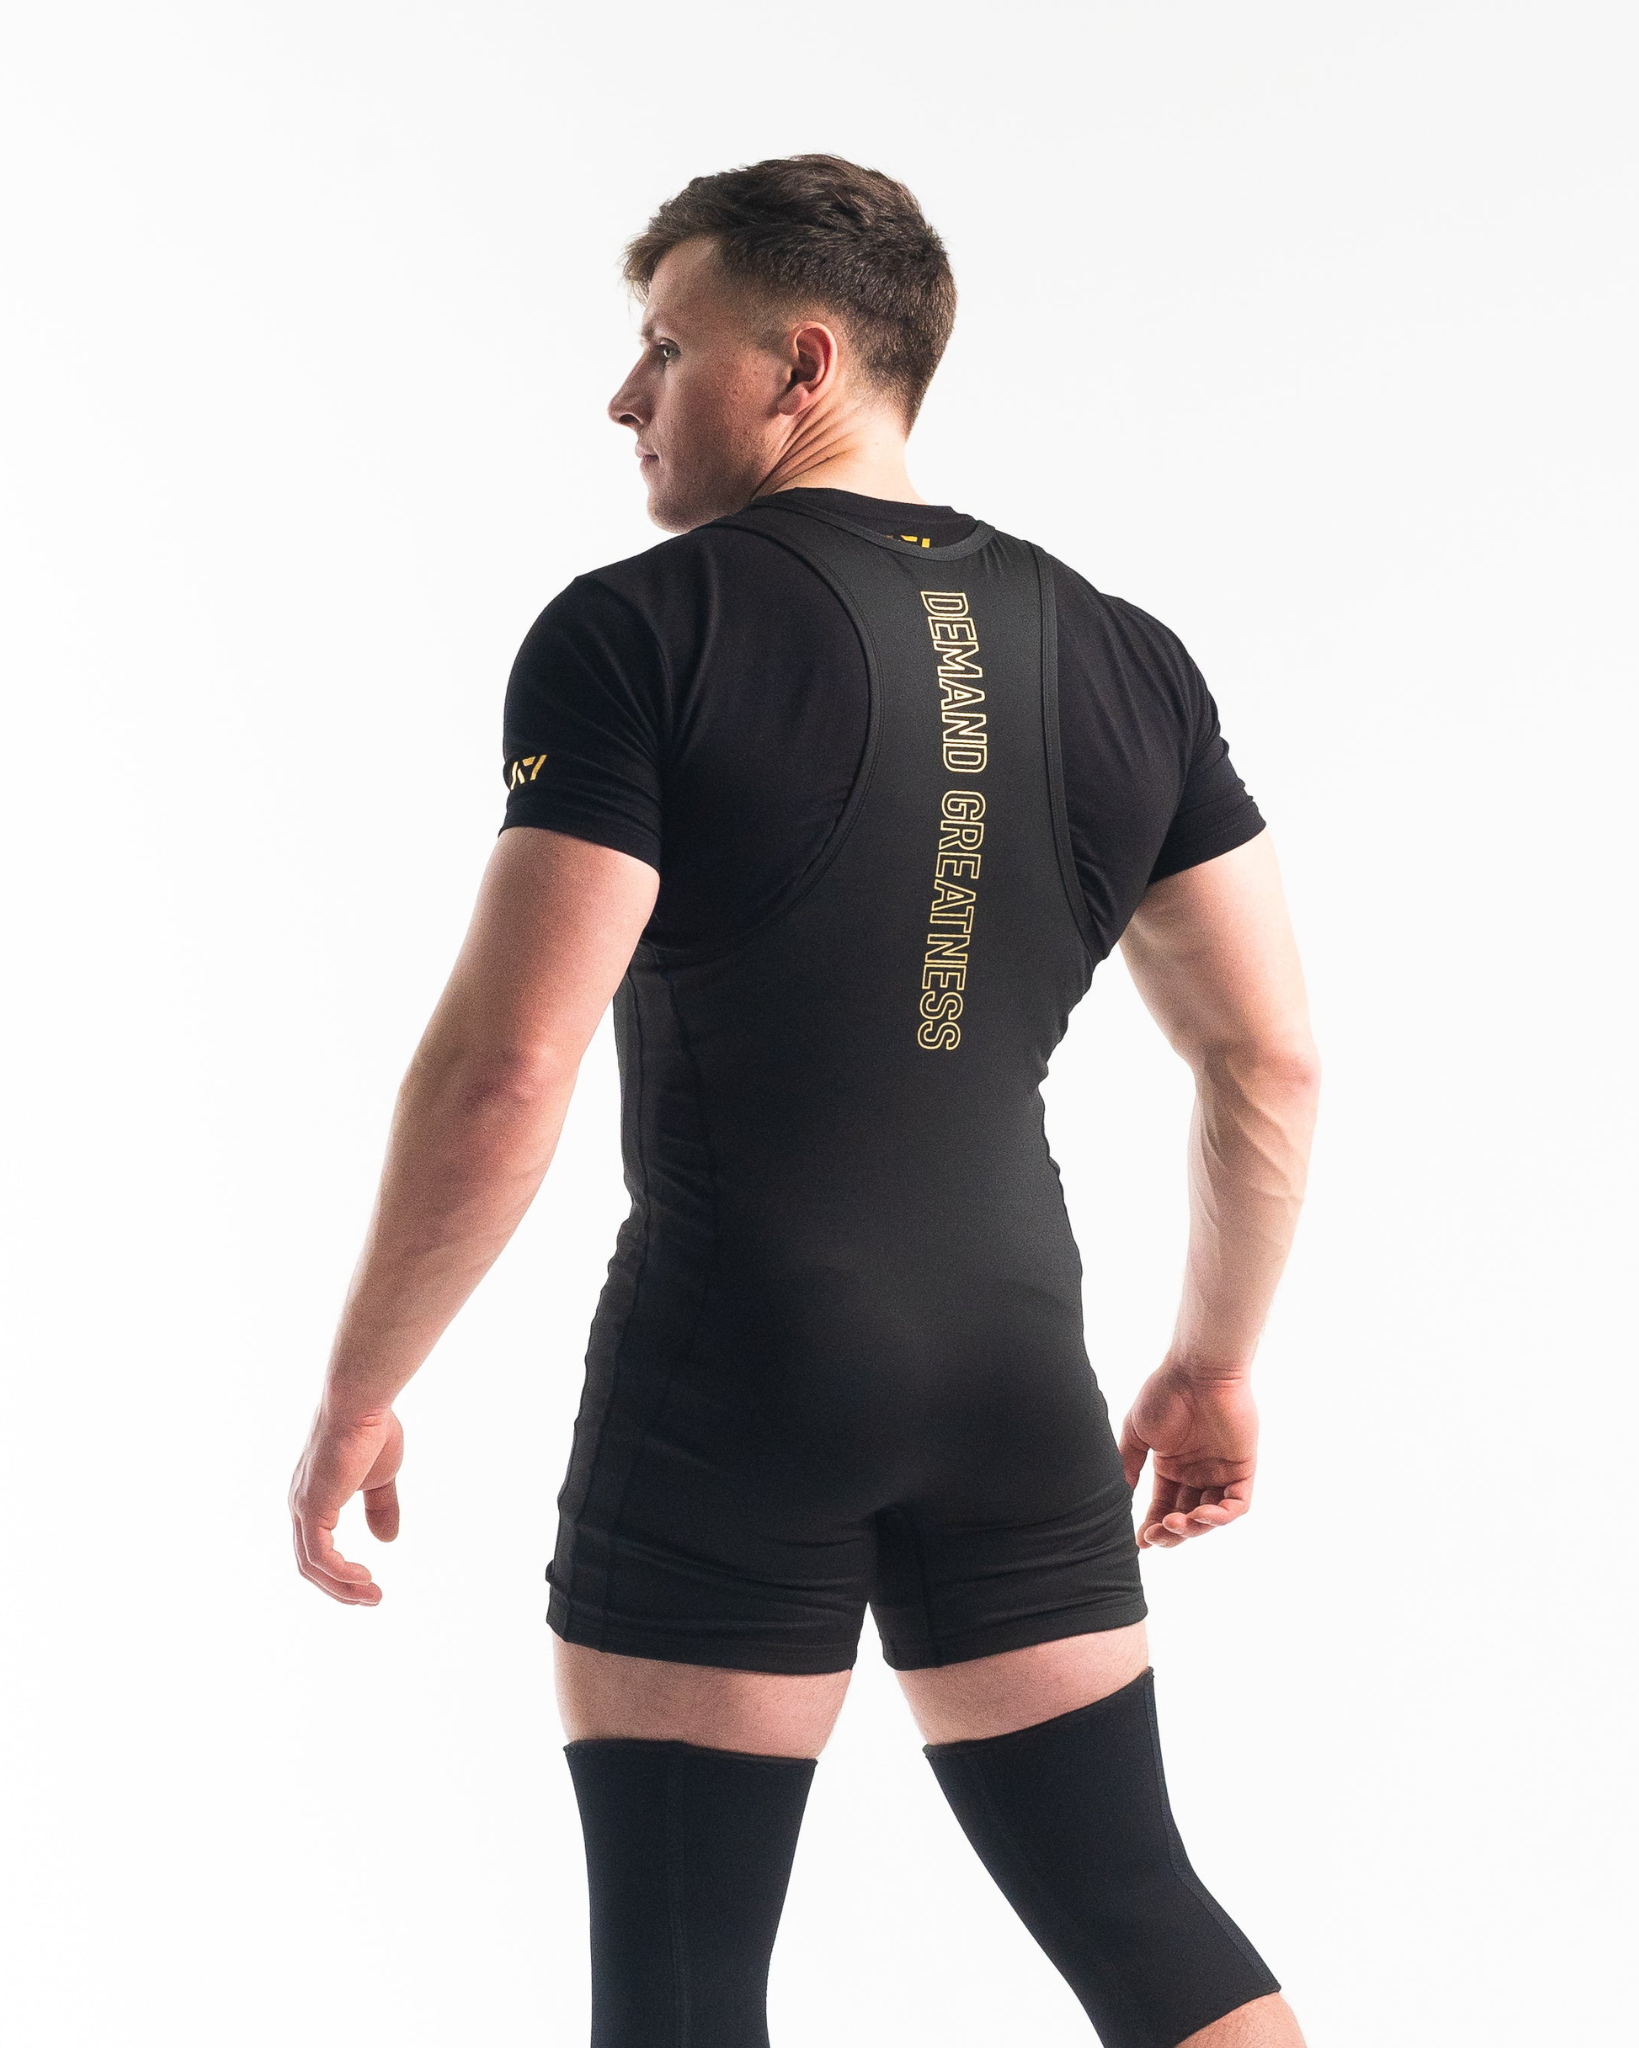 A7 IPF Approved Gold Luno singlet features extra lat mobility, side panel stitching to guide the squat depth level and curved panel design for a slimming look. The Women's cut singlet features a tapered waist and additional quad room. The IPF Approved Kit includes Powerlifting Singlet, A7 Meet Shirt, A7 Zebra Wrist Wraps, A7 Deadlift Socks, Hourglass Knee Sleeves (Stiff Knee Sleeves and Rigor Mortis Knee Sleeves). Genouillères powerlifting shipping to France, Spain, Ireland, Germany, Italy, Sweden and EU. 